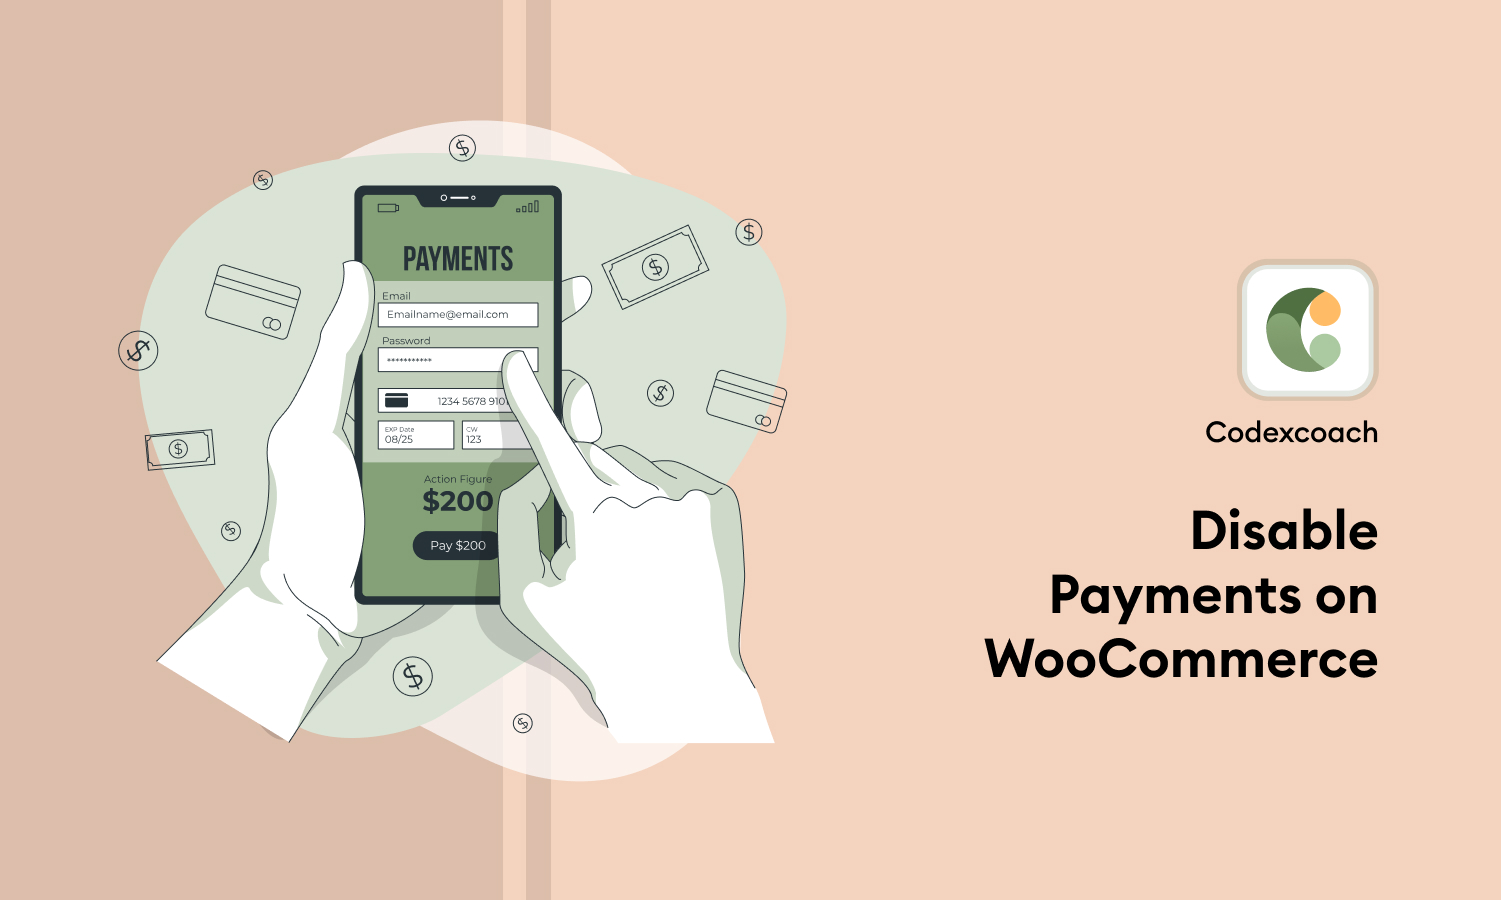 Disable Payments on WooCommerce